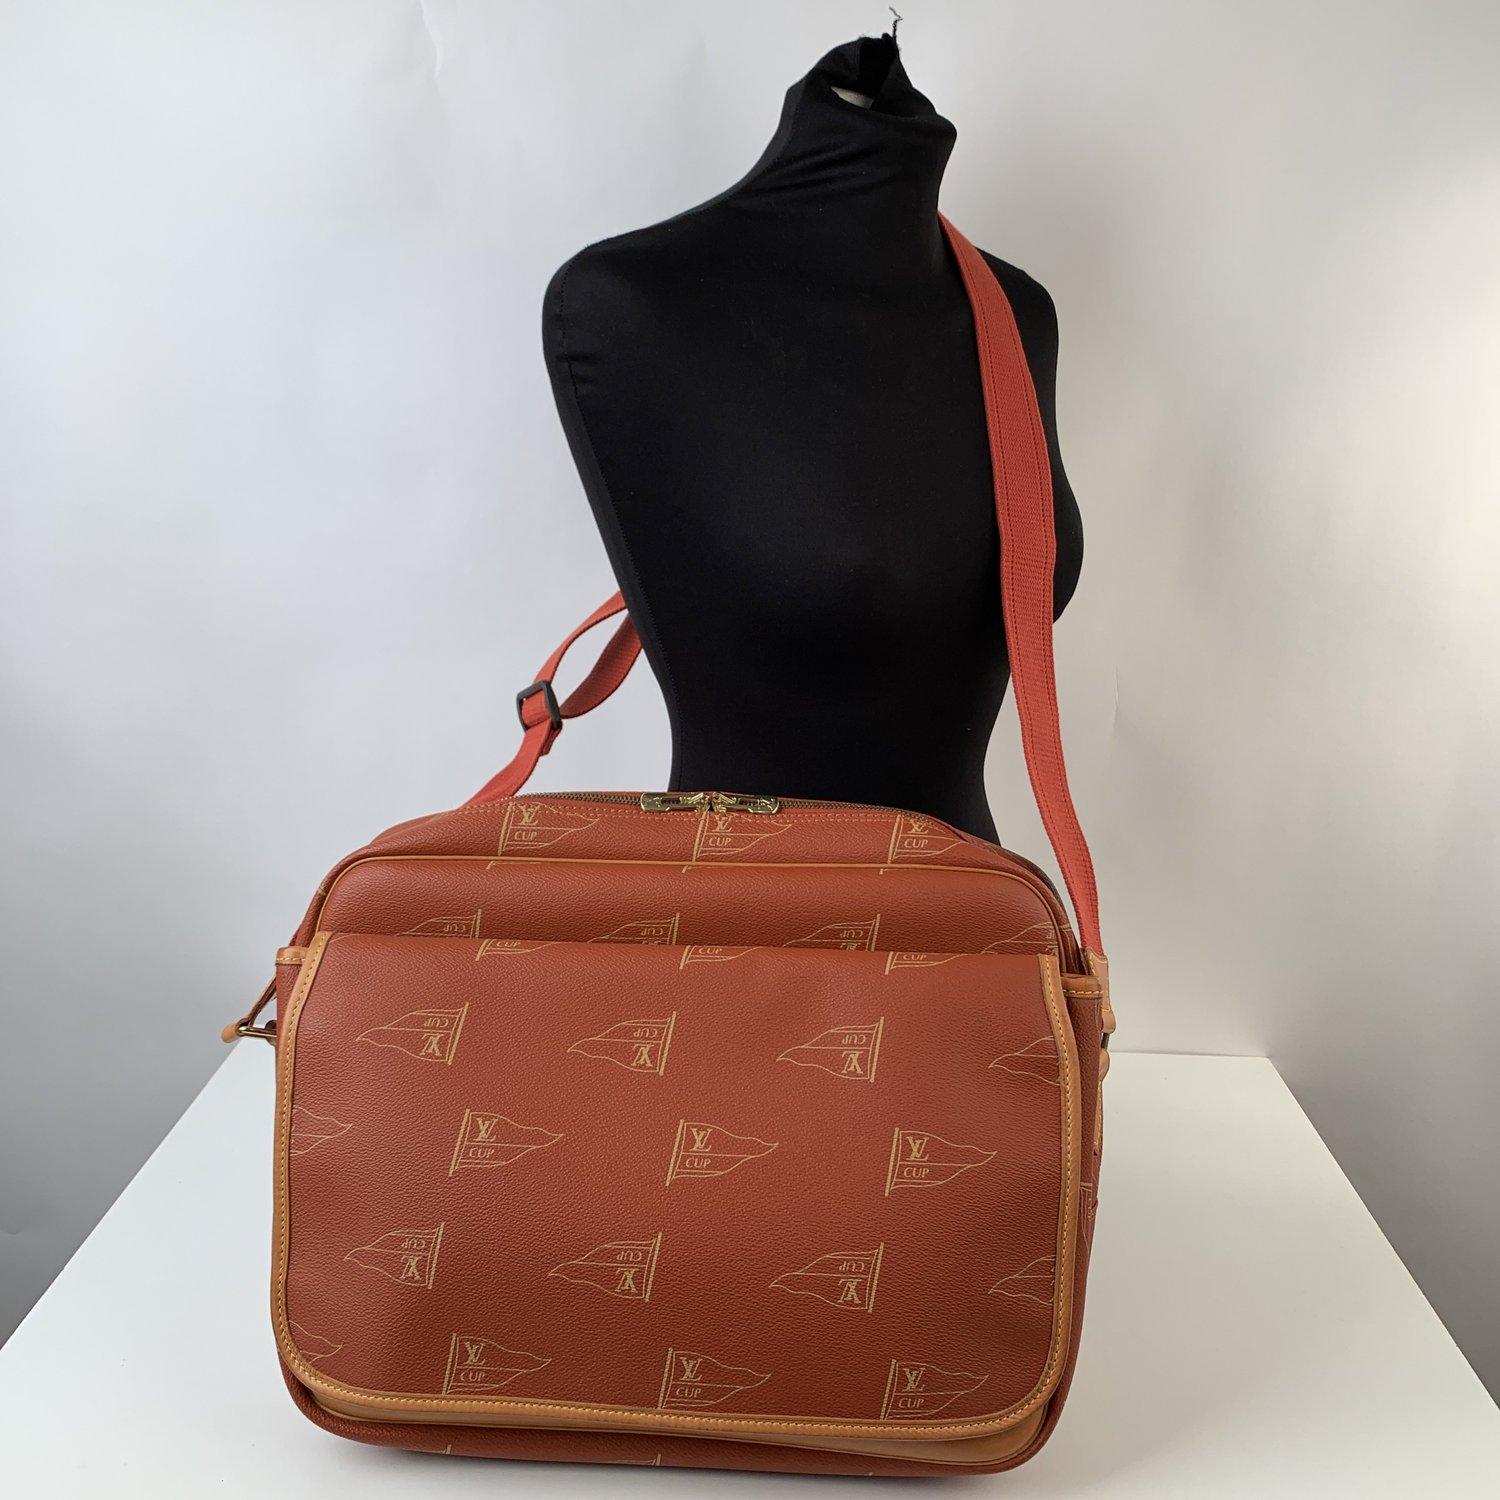 MATERIAL: Canvas COLOR: Red MODEL: America's Cup Calvi Messenger Bag GENDER: Women, Men SIZE: Large Condition A :EXCELLENT CONDITION - Used once or twice. Looks mint. Imperceptible signs of wear may be present due to storage- Some darkness and